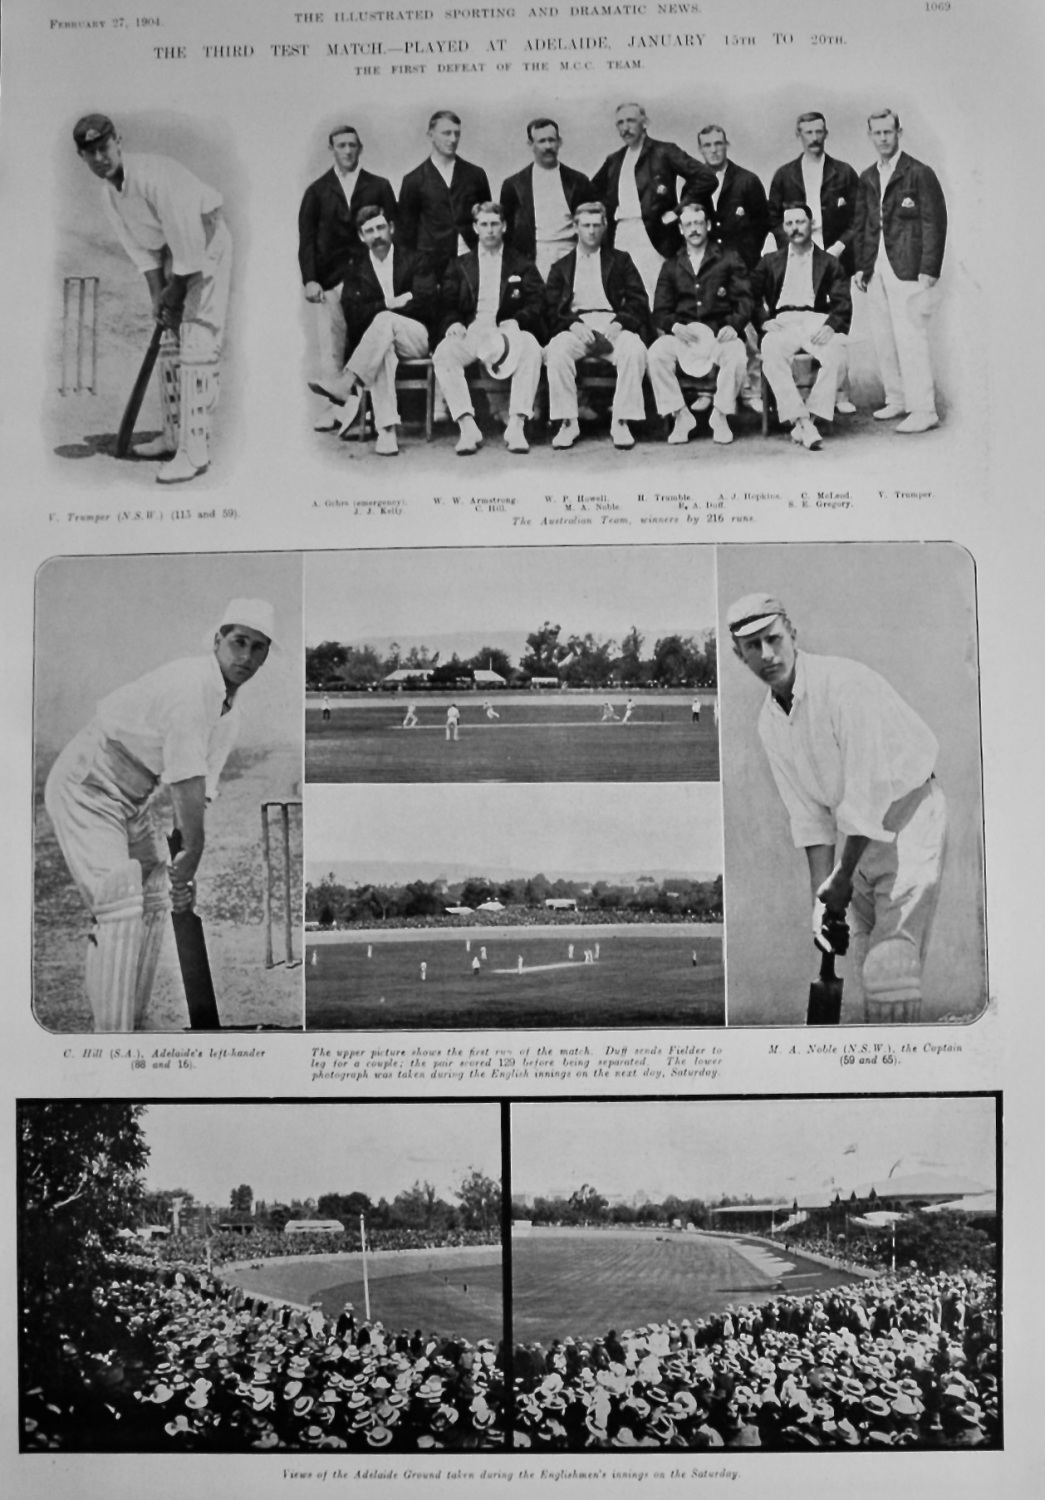 The Third Test Match.- Played at Adelaide, January 15th, to 20th, 1904. (Cr